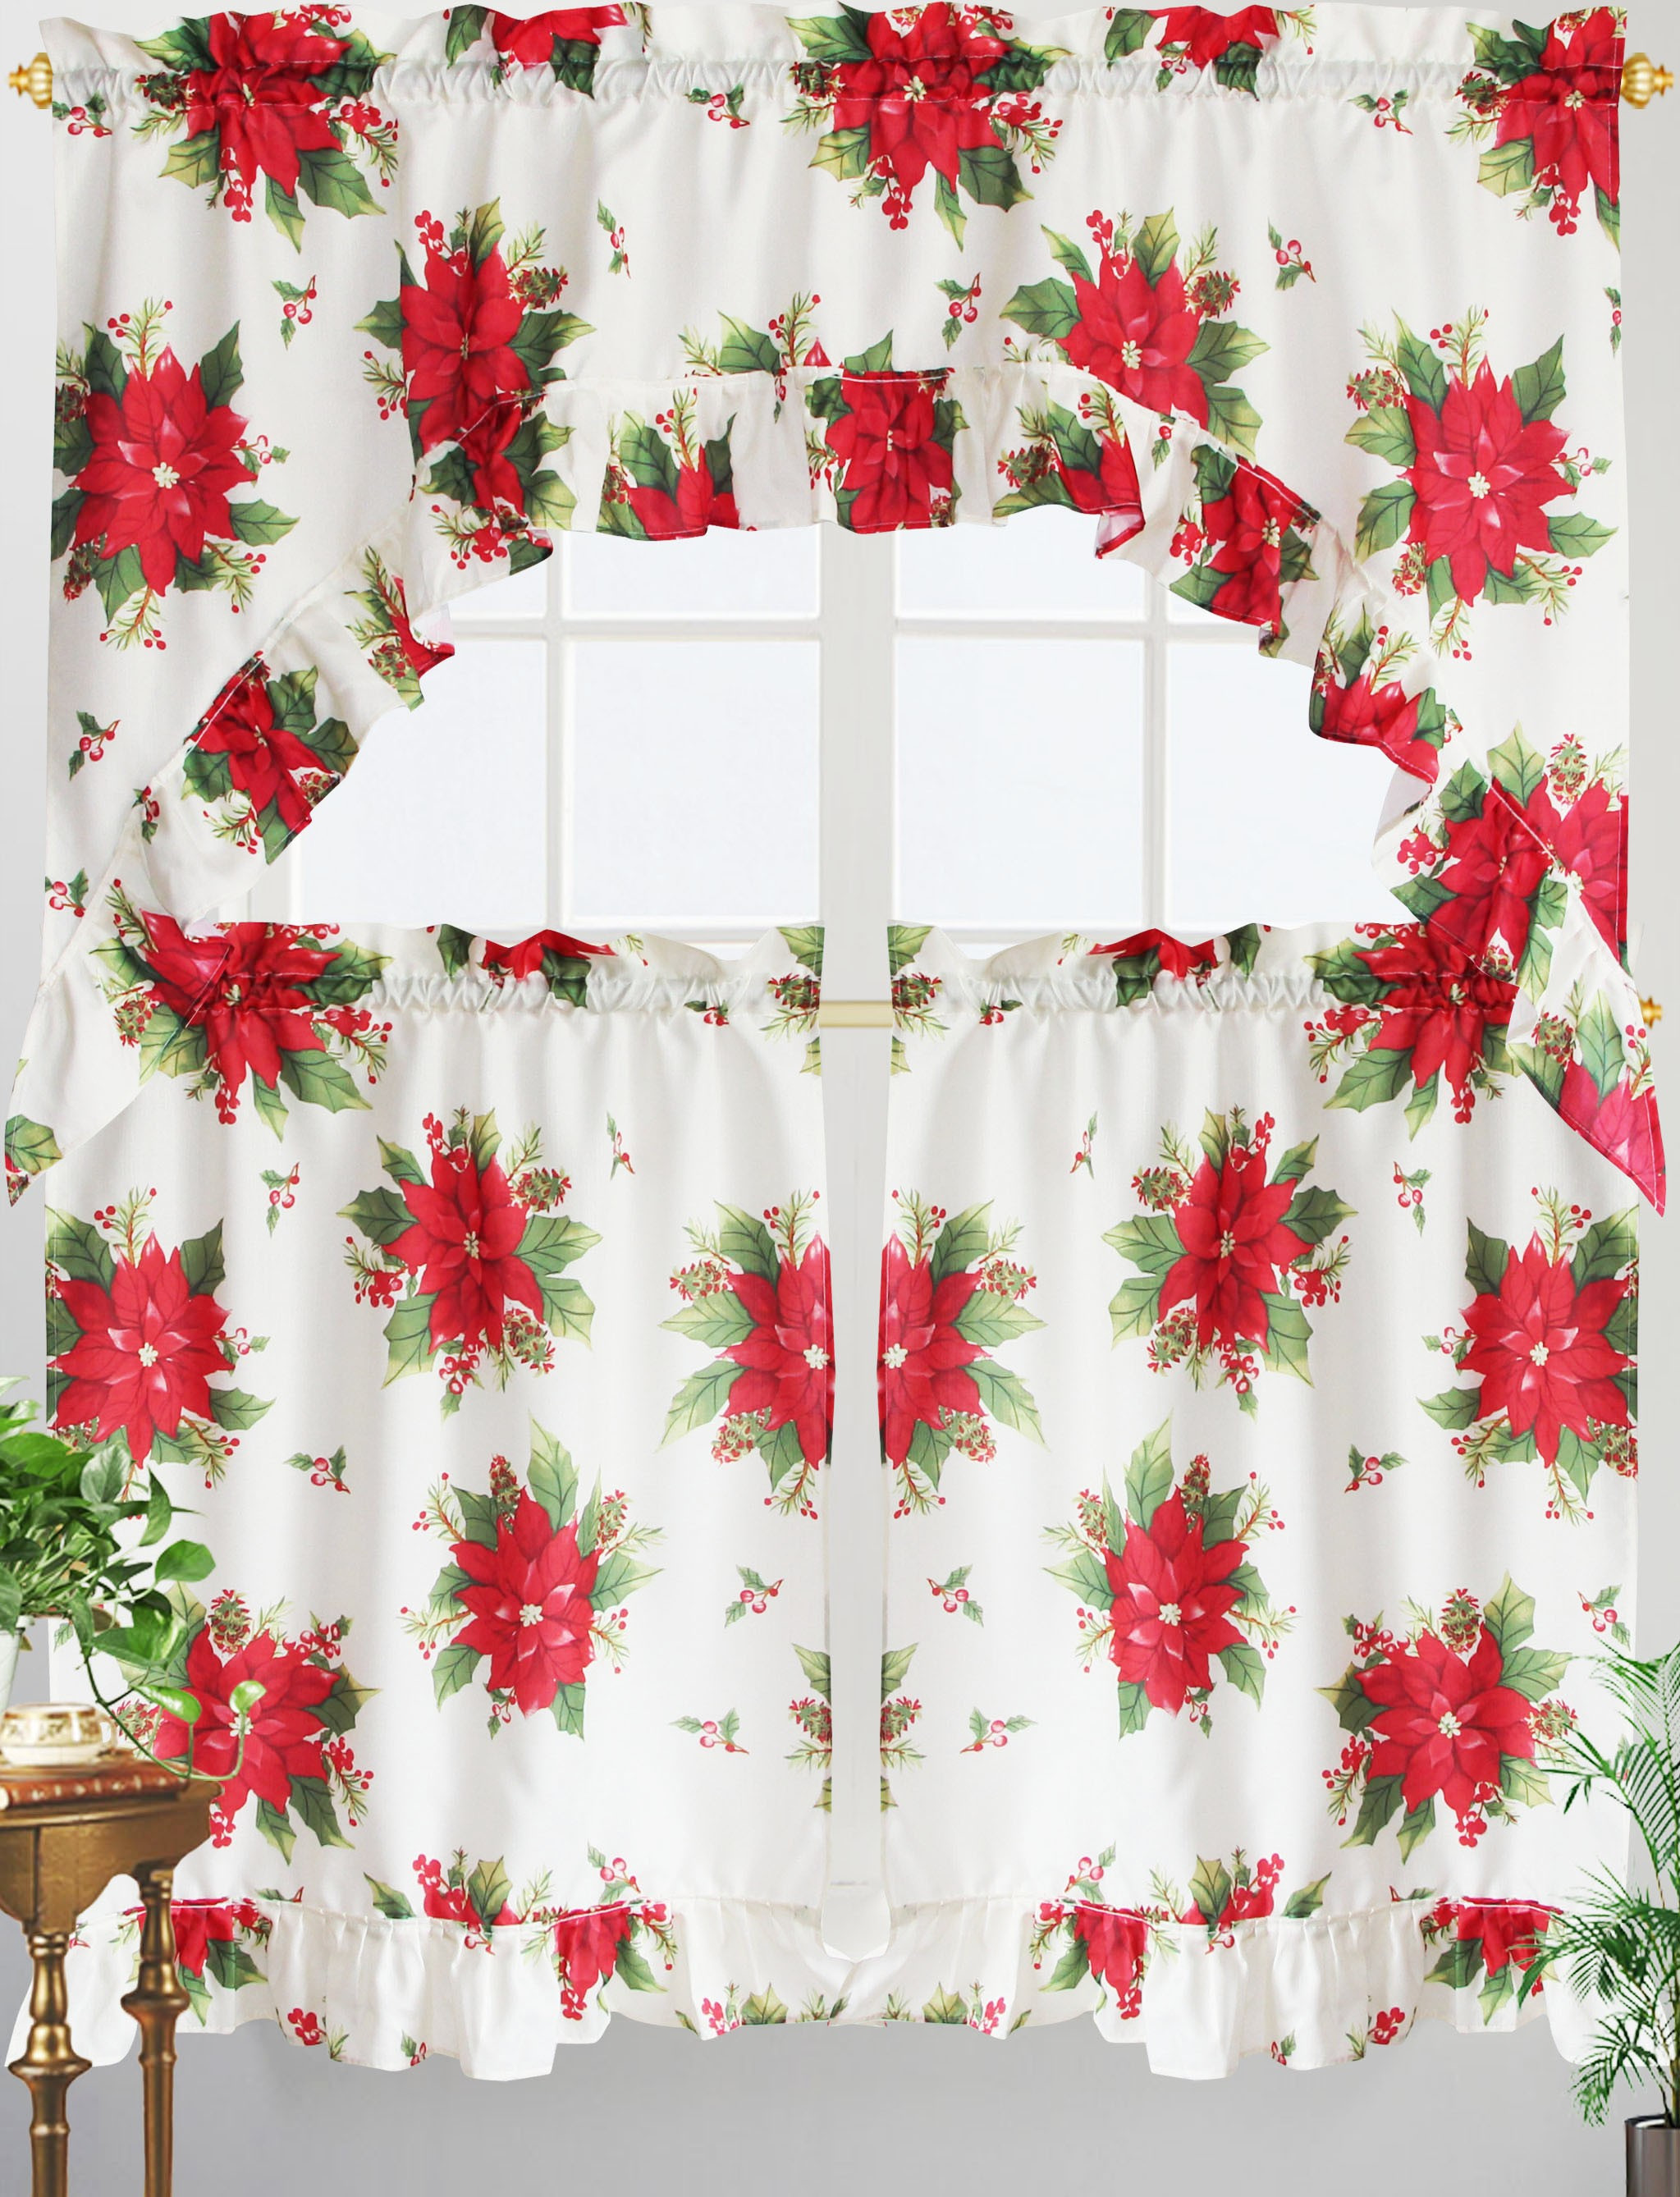 Christmas Kitchen Curtains
 Promo Printed Holiday 3 Piece Kitchen Curtain Set